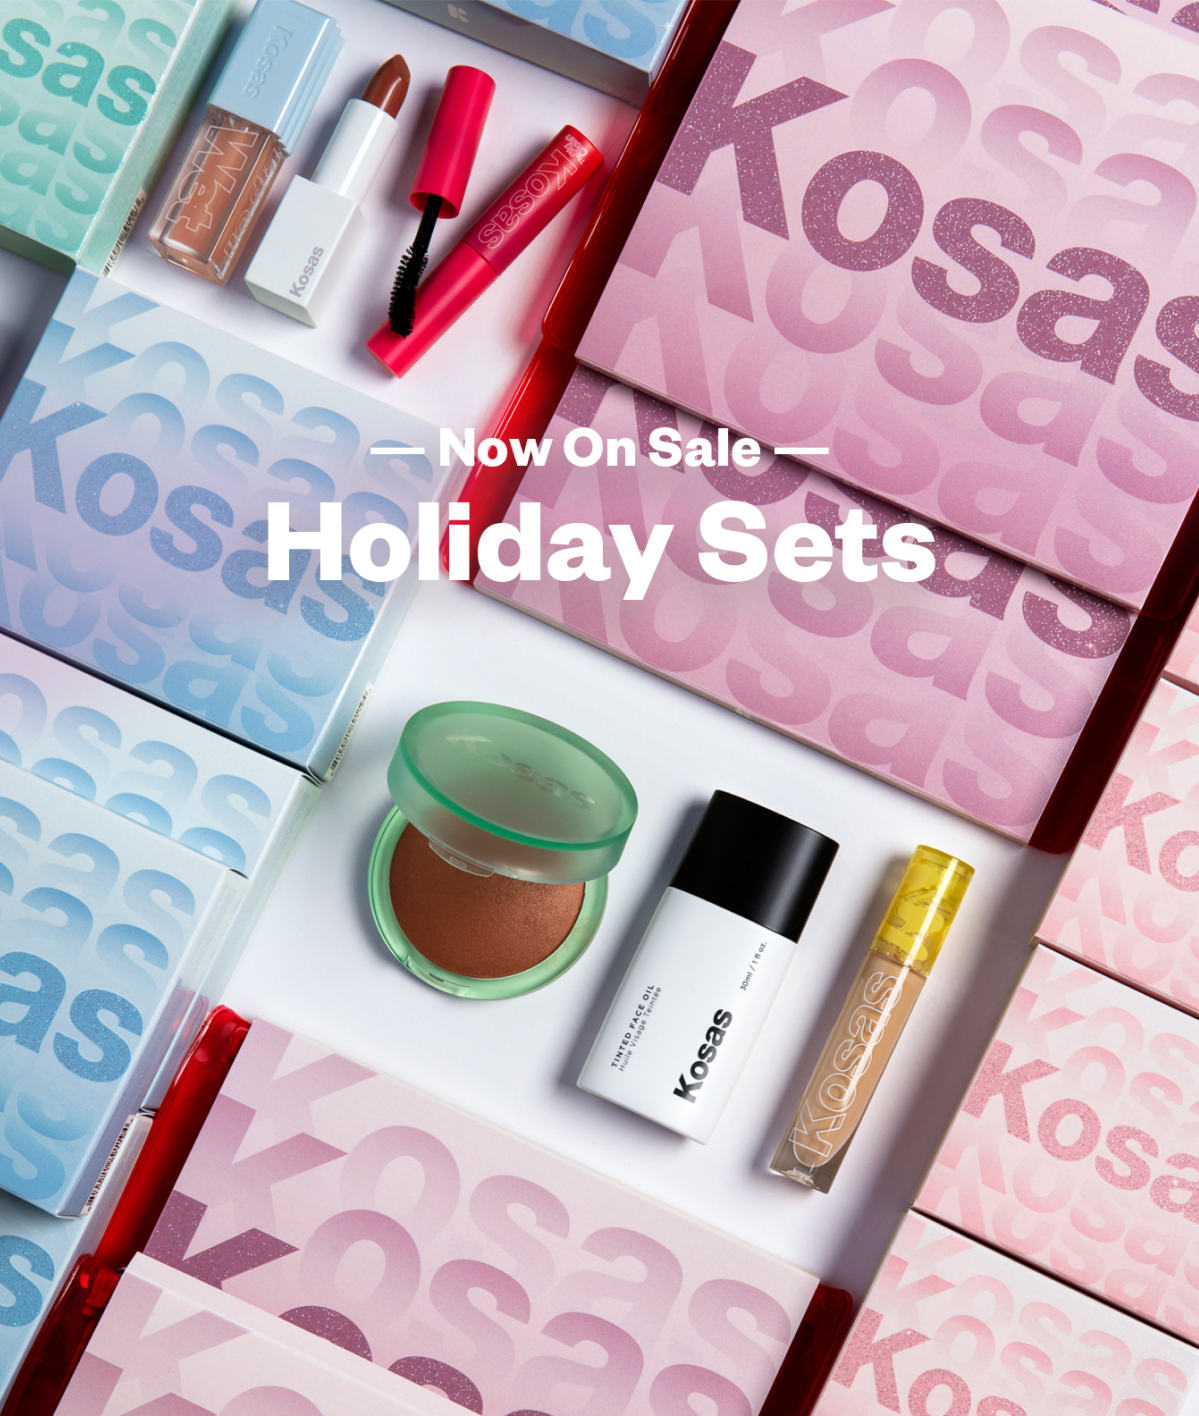 Holiday Sets on Sale